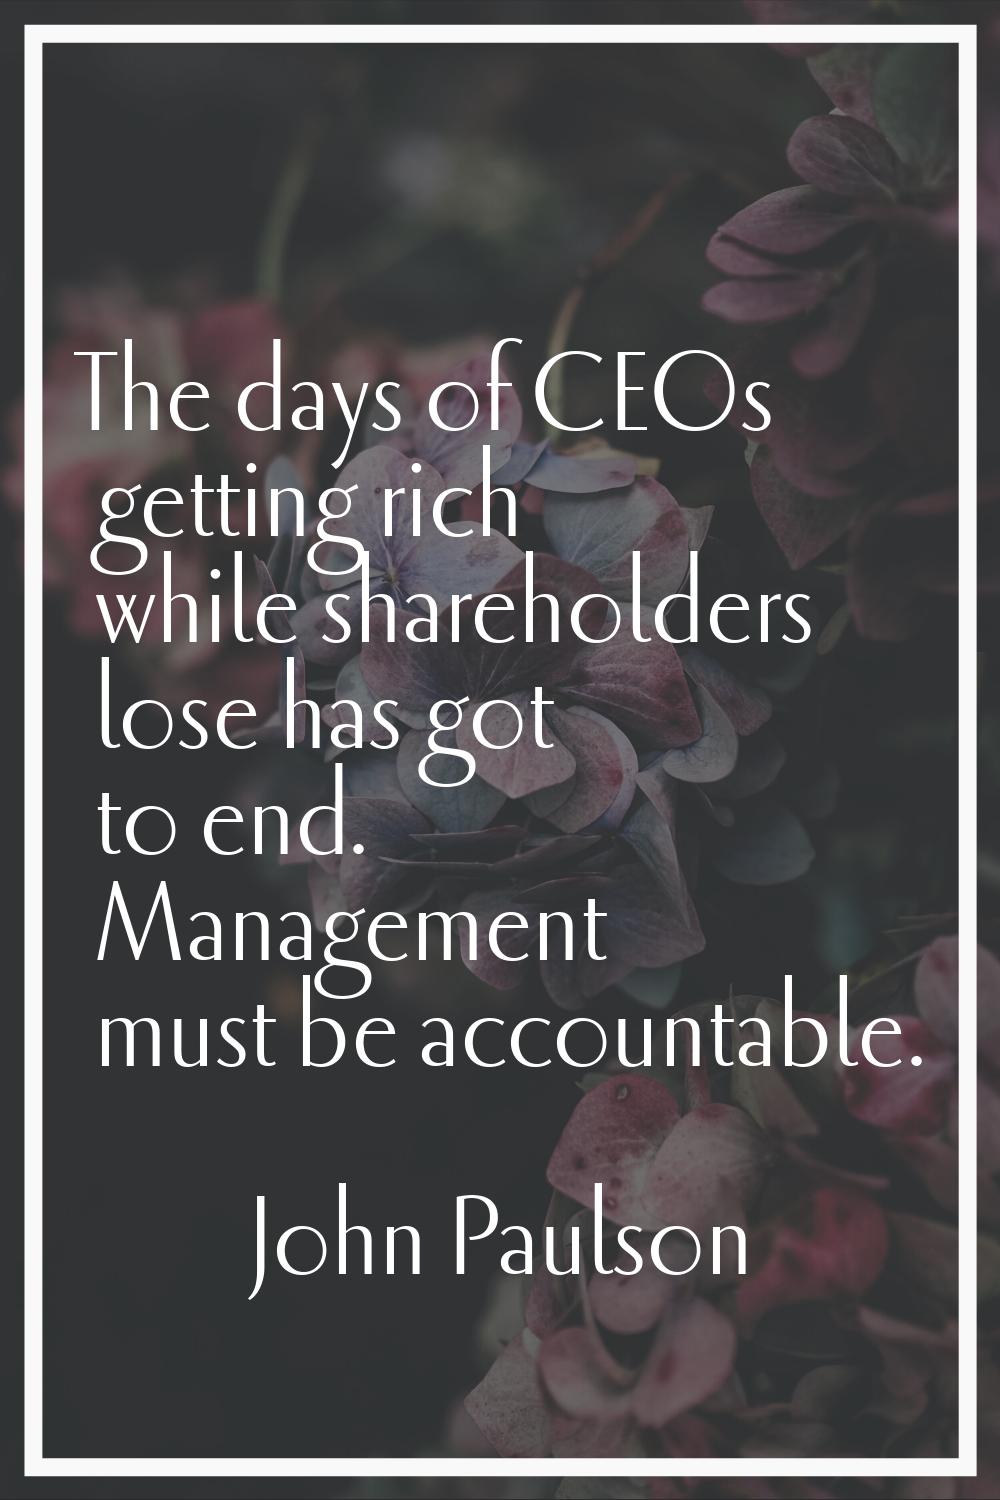 The days of CEOs getting rich while shareholders lose has got to end. Management must be accountabl